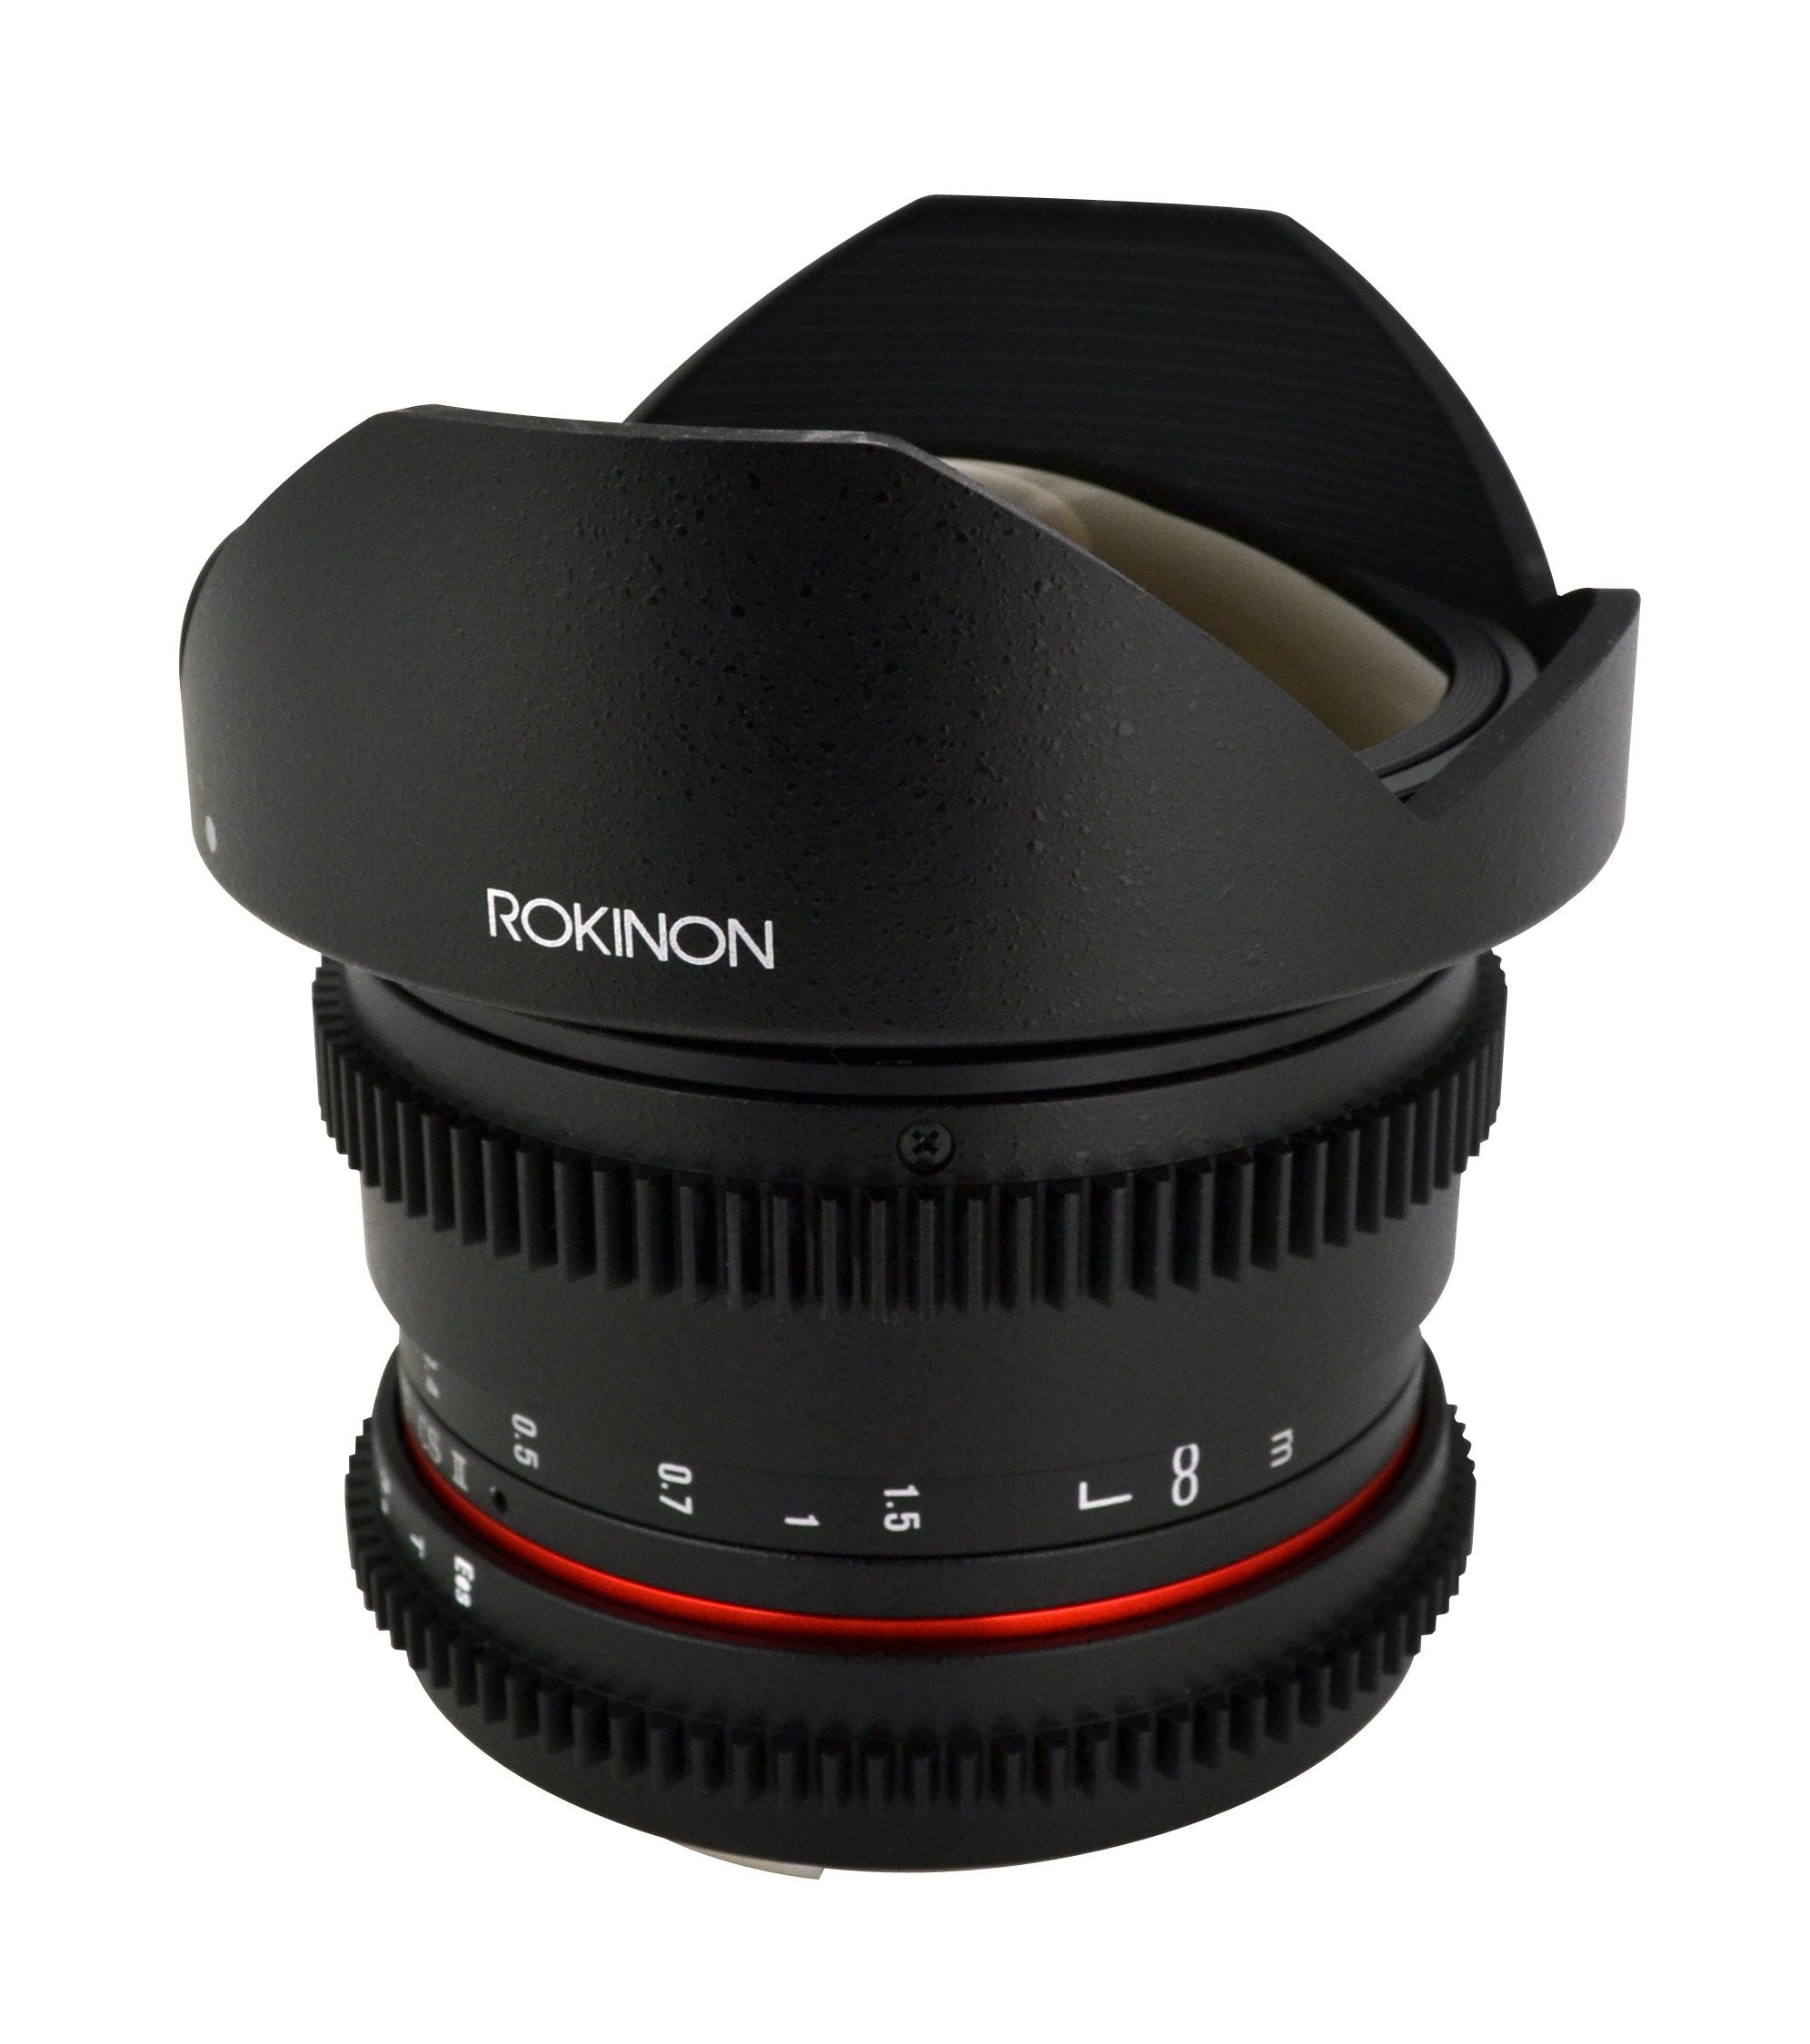 Rokinon RKHD8MV-N HD 8mm t/3.8 Fisheye Lens for Nikon with De-clicked Aperture and Removable HoodWide-Angle Lens